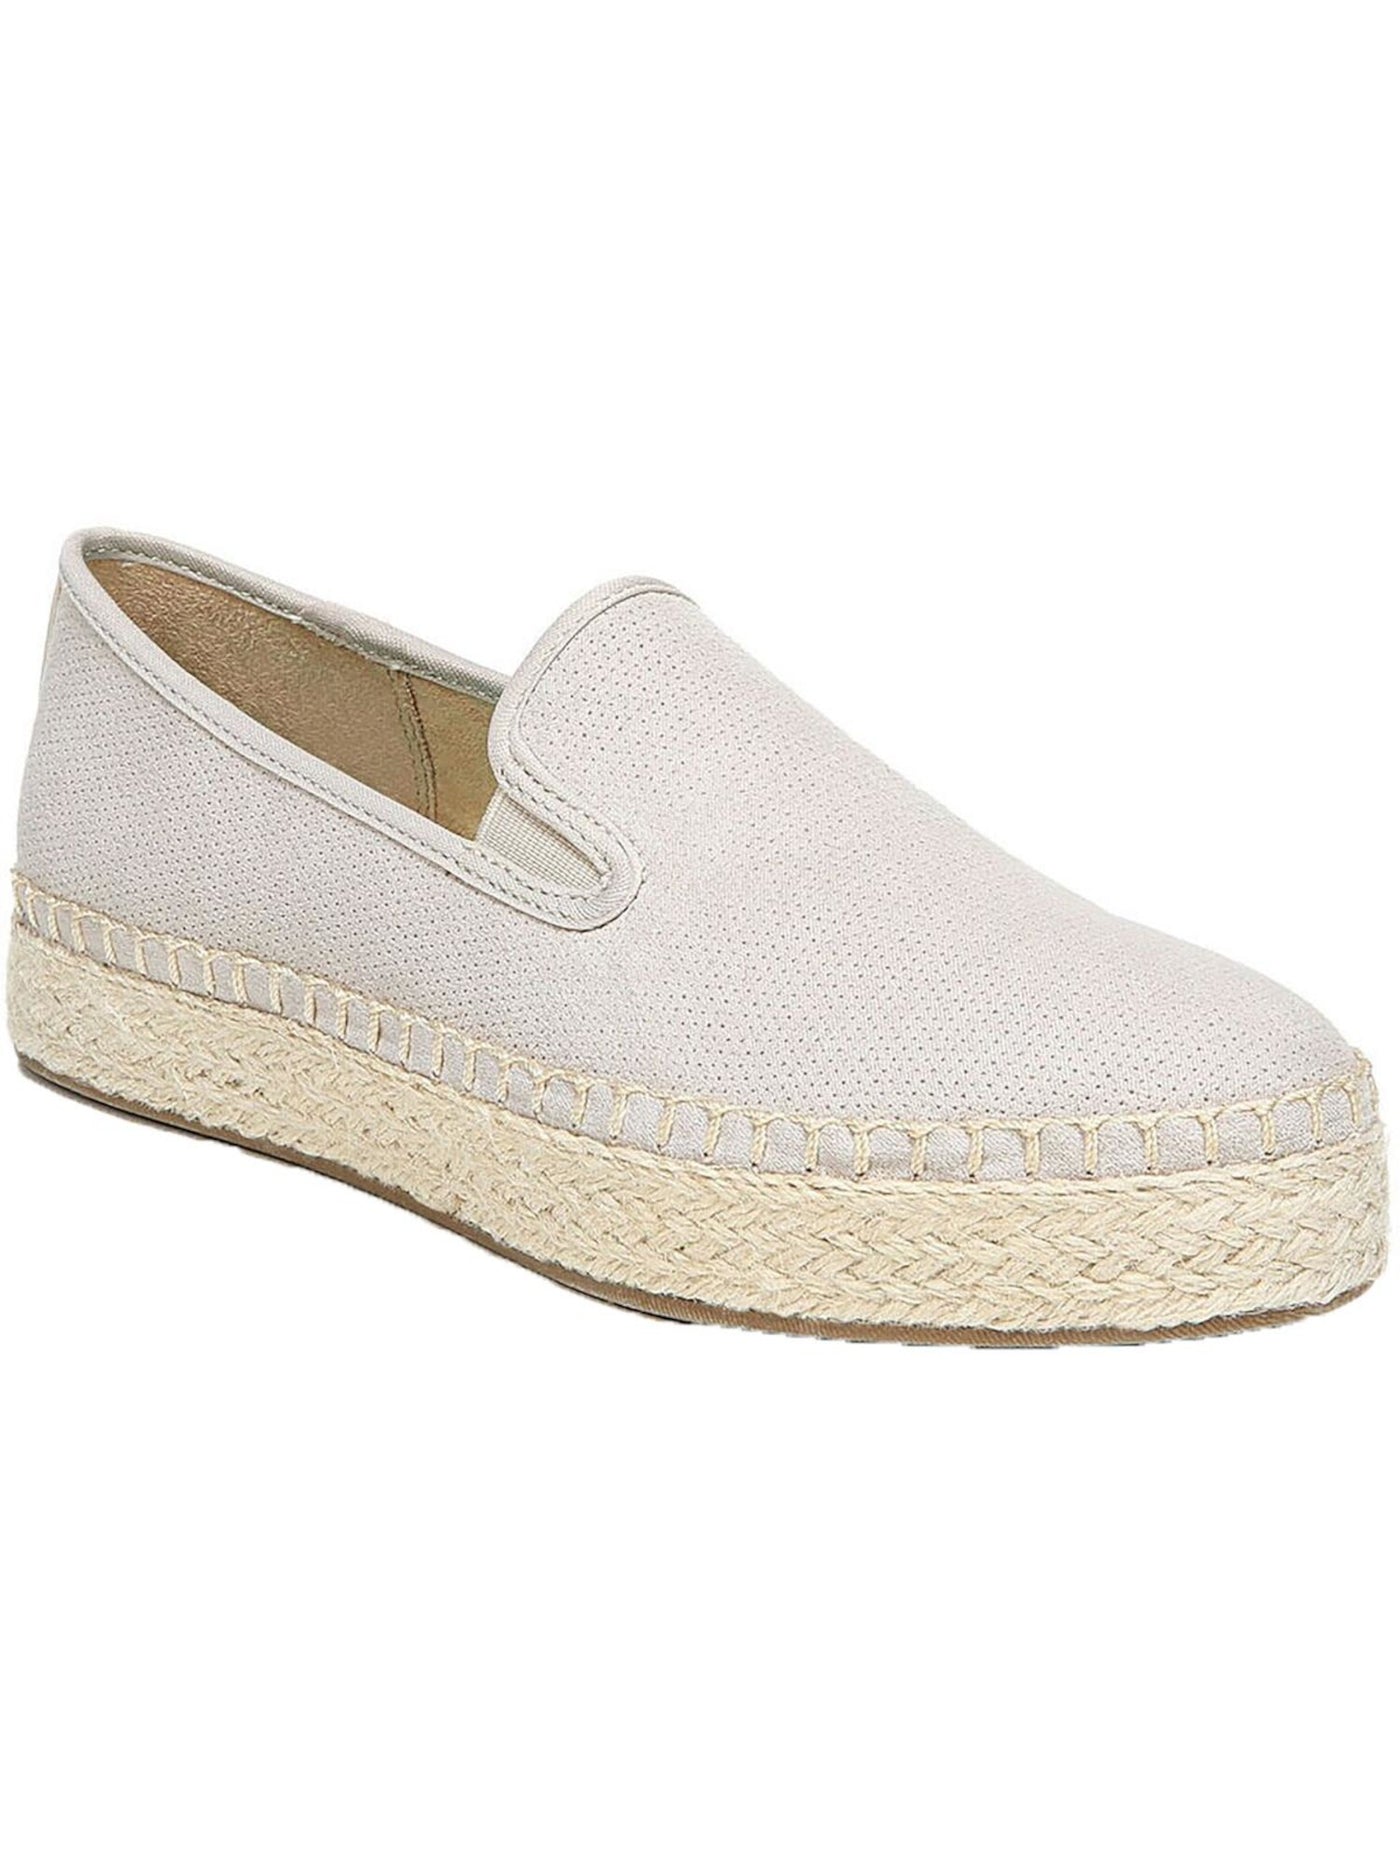 DR SCHOLLS Womens Beige Espadrille Perforated Slip Resistant Cushioned Far Out Round Toe Platform Slip On Loafers Shoes 6